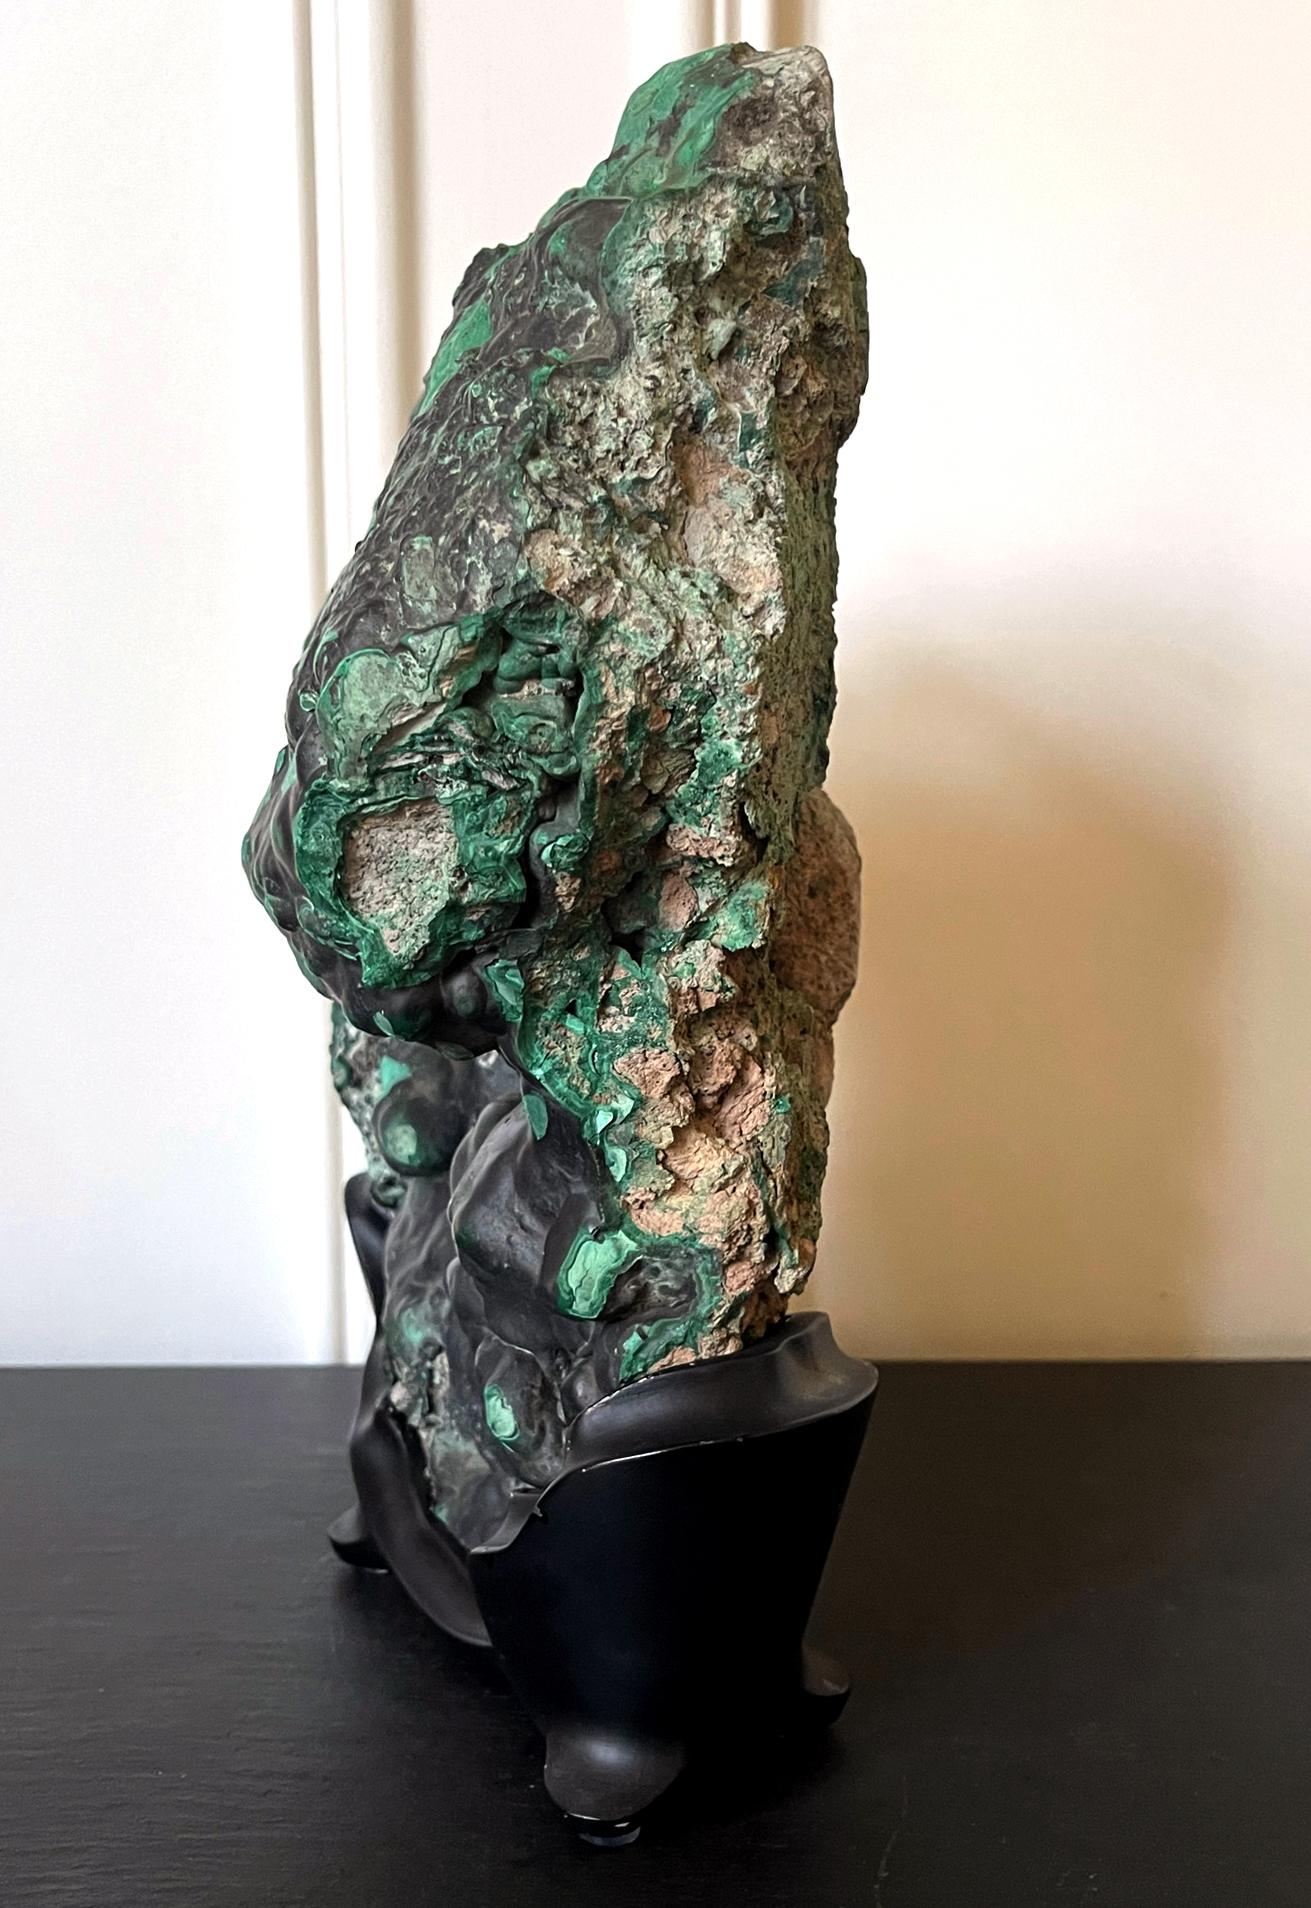 American Natural Malachite Rock on Display Stand as Chinese Scholar Stone For Sale